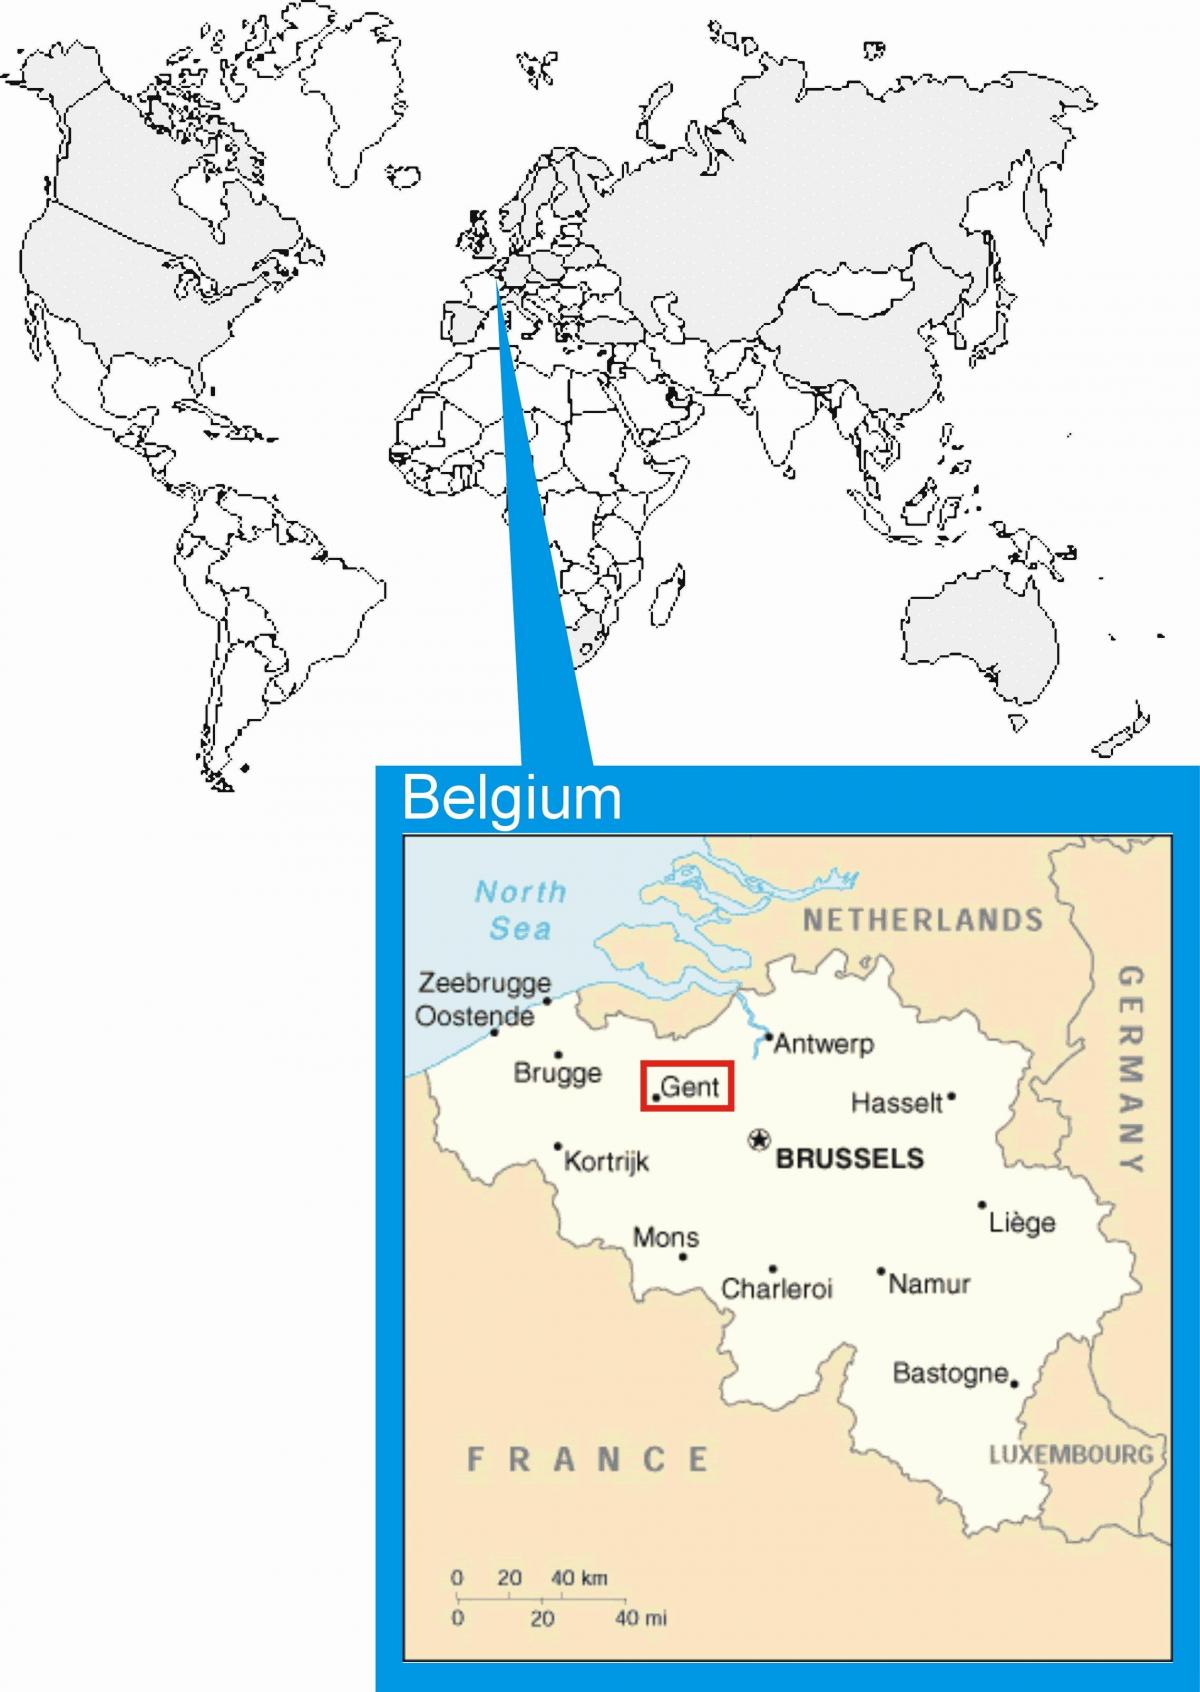 Brussels map in world